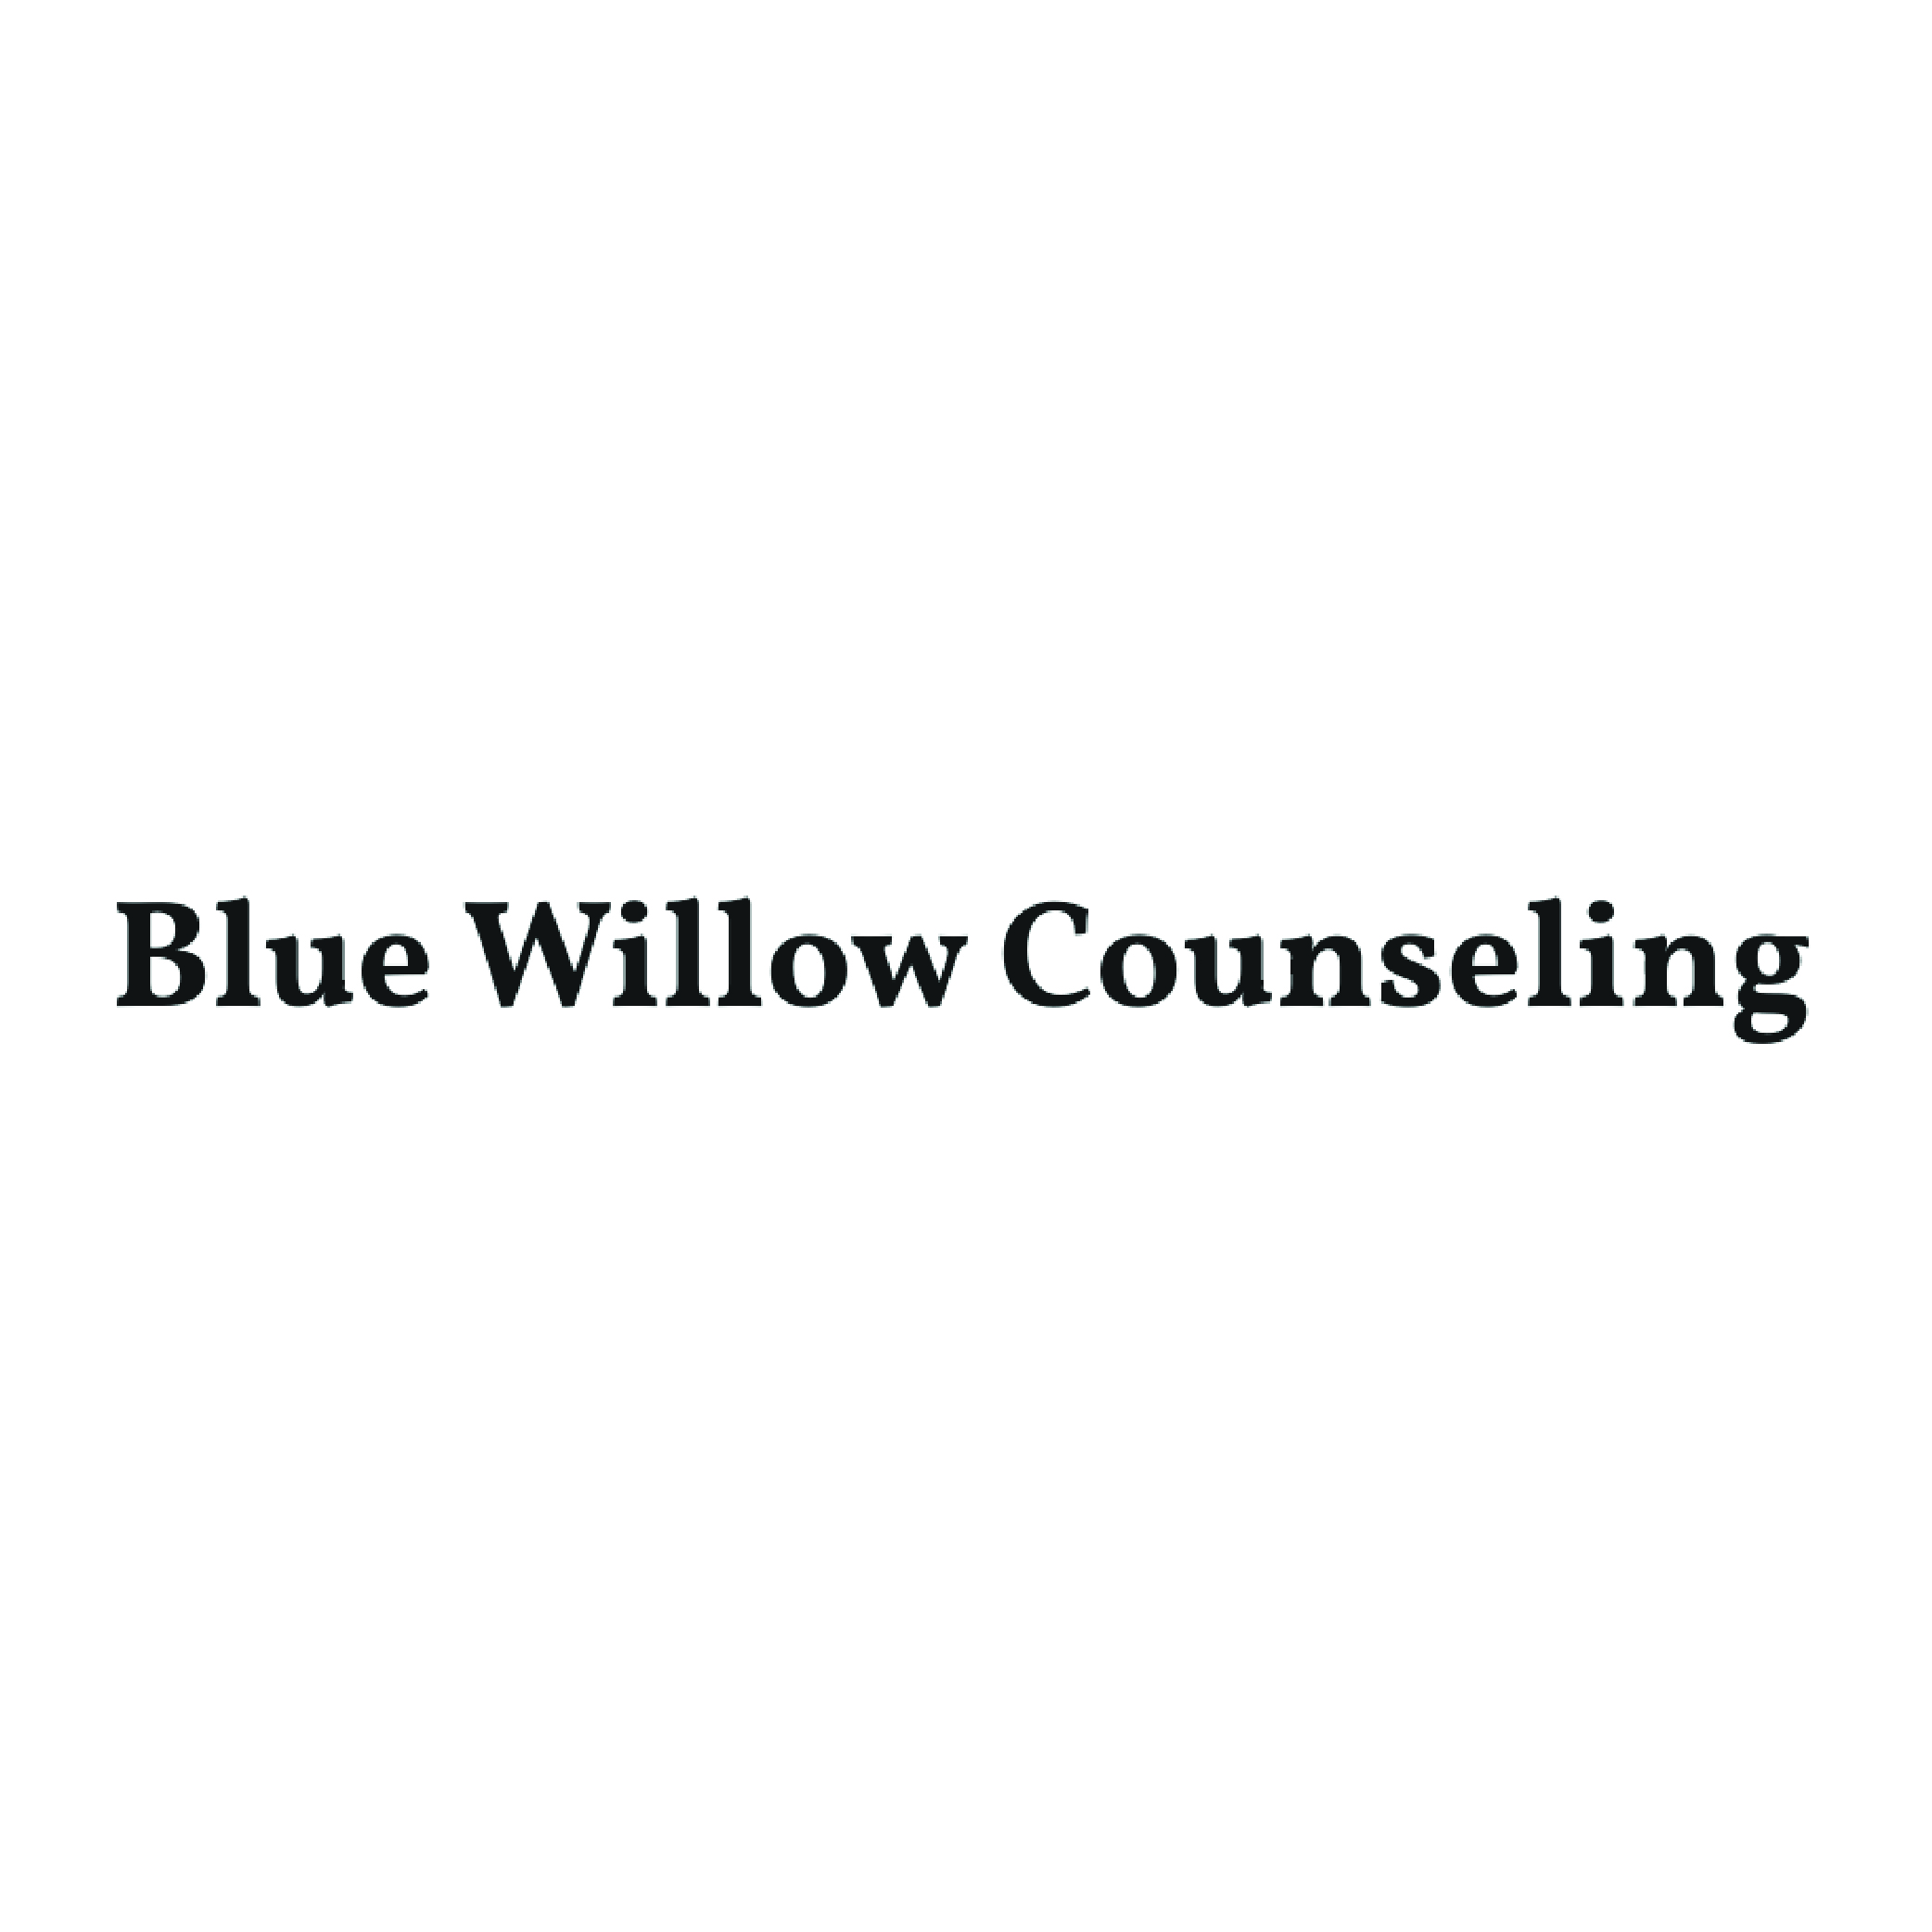 Blue Willow Counseling logo